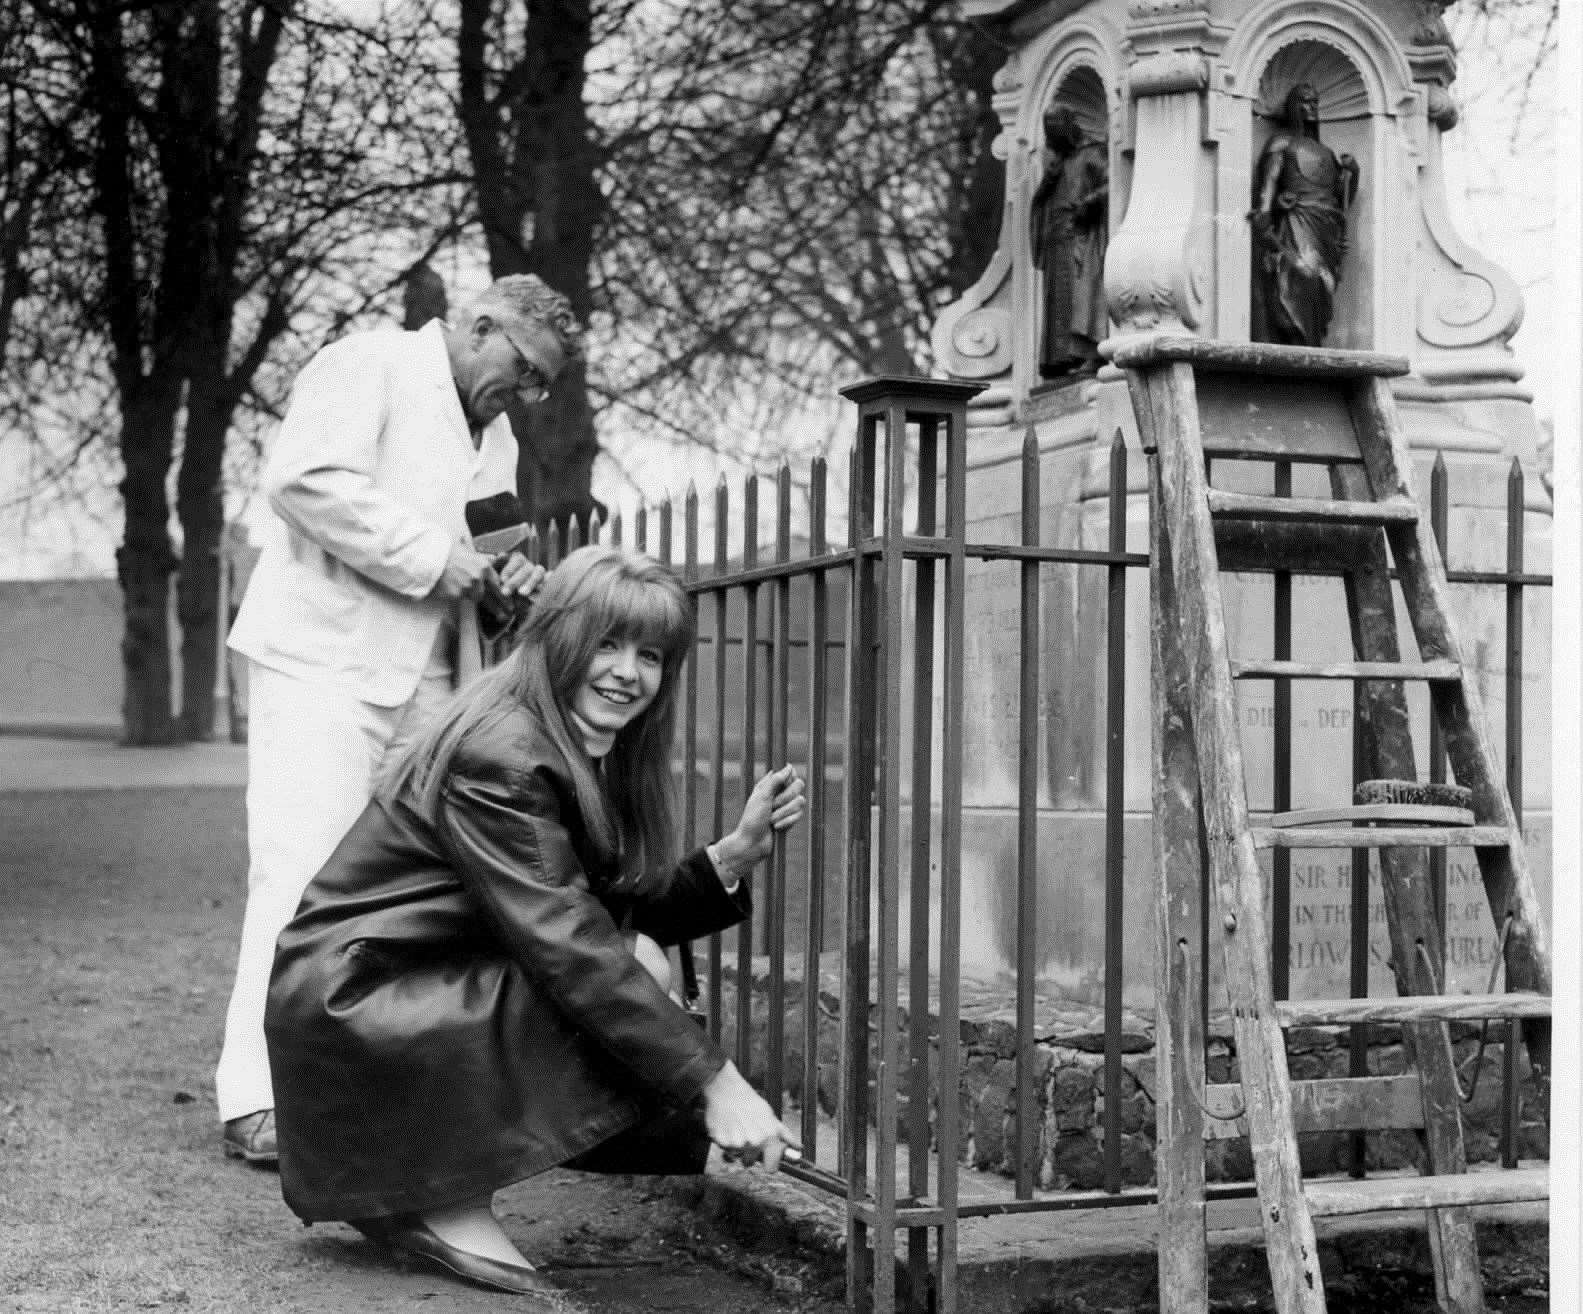 Actress Jane Asher, 17, (then girlfriend of Paul McCartney) poses by the Kitty Marlowe memorial (then in Dane John) in February 1964. She was in Canterbury to star in The Jew of Malta, the play by Christoper Marlowe being produced at the old Marlowe Theatre to mark the 400th anniversary of his birth. During the play's run, and with Beatlemania at it's height, McCartney was smuggled into the theatre by Kentish Gazette staff one night so that he could watch her performance unrecognised